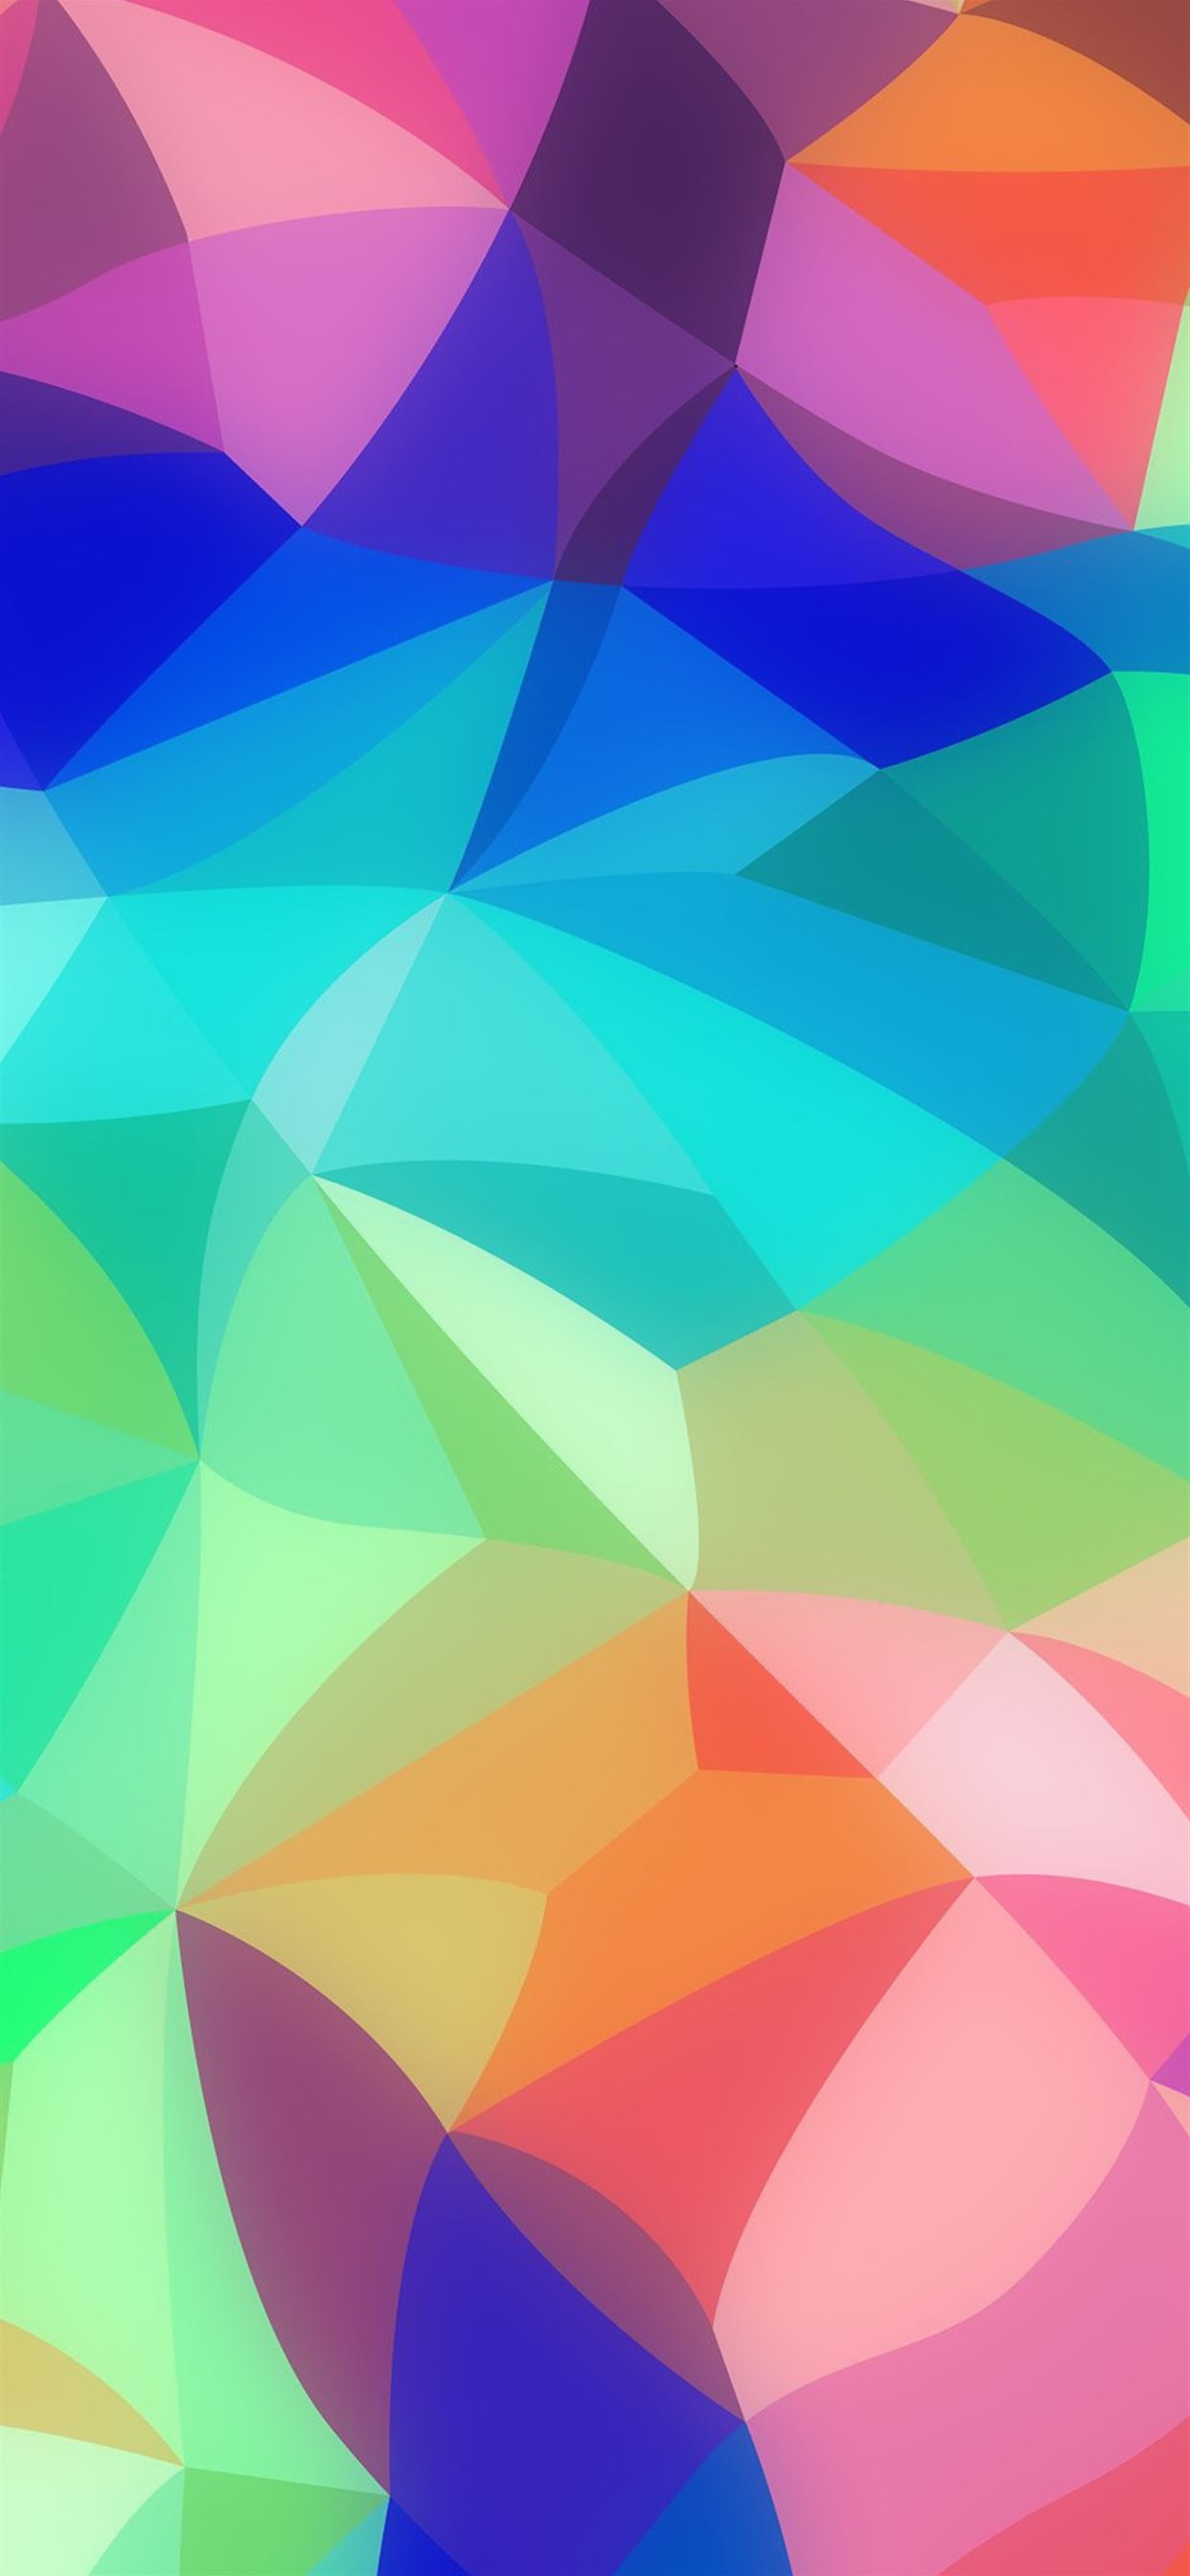 Rainbow abstract colors pastel pattern iPhone X Wallpaper Free Download